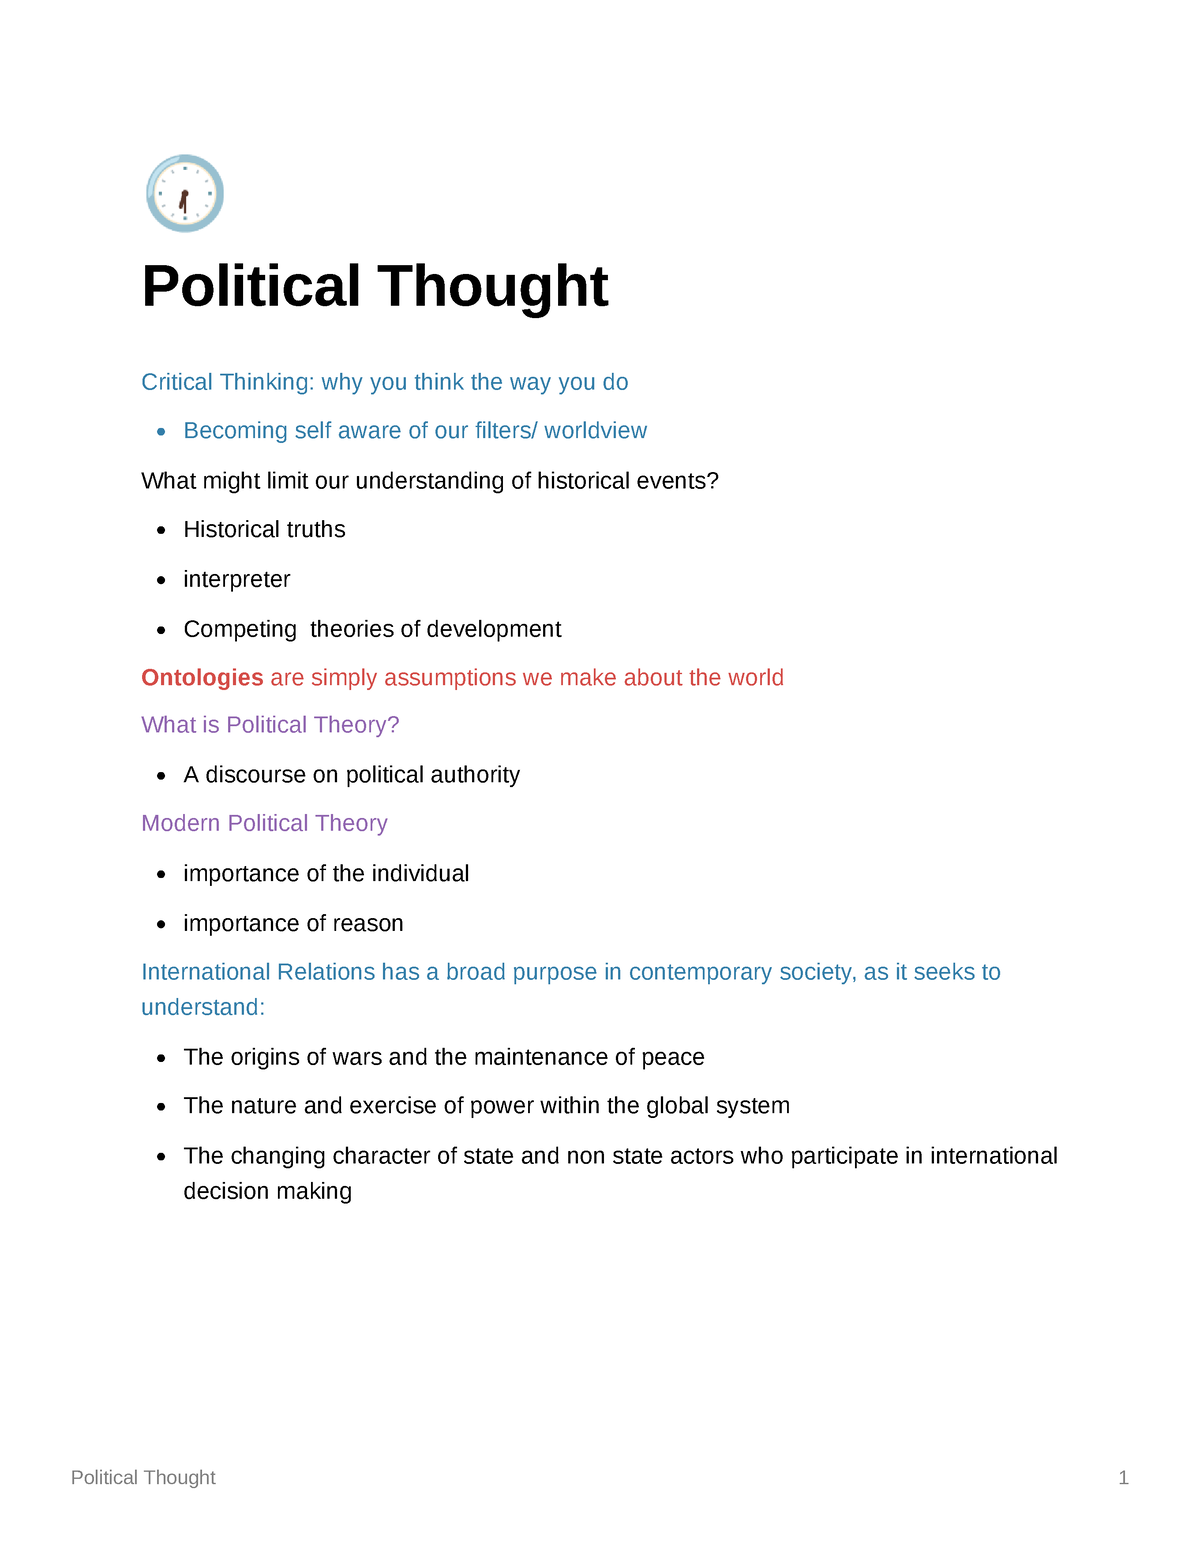 political thought essay questions